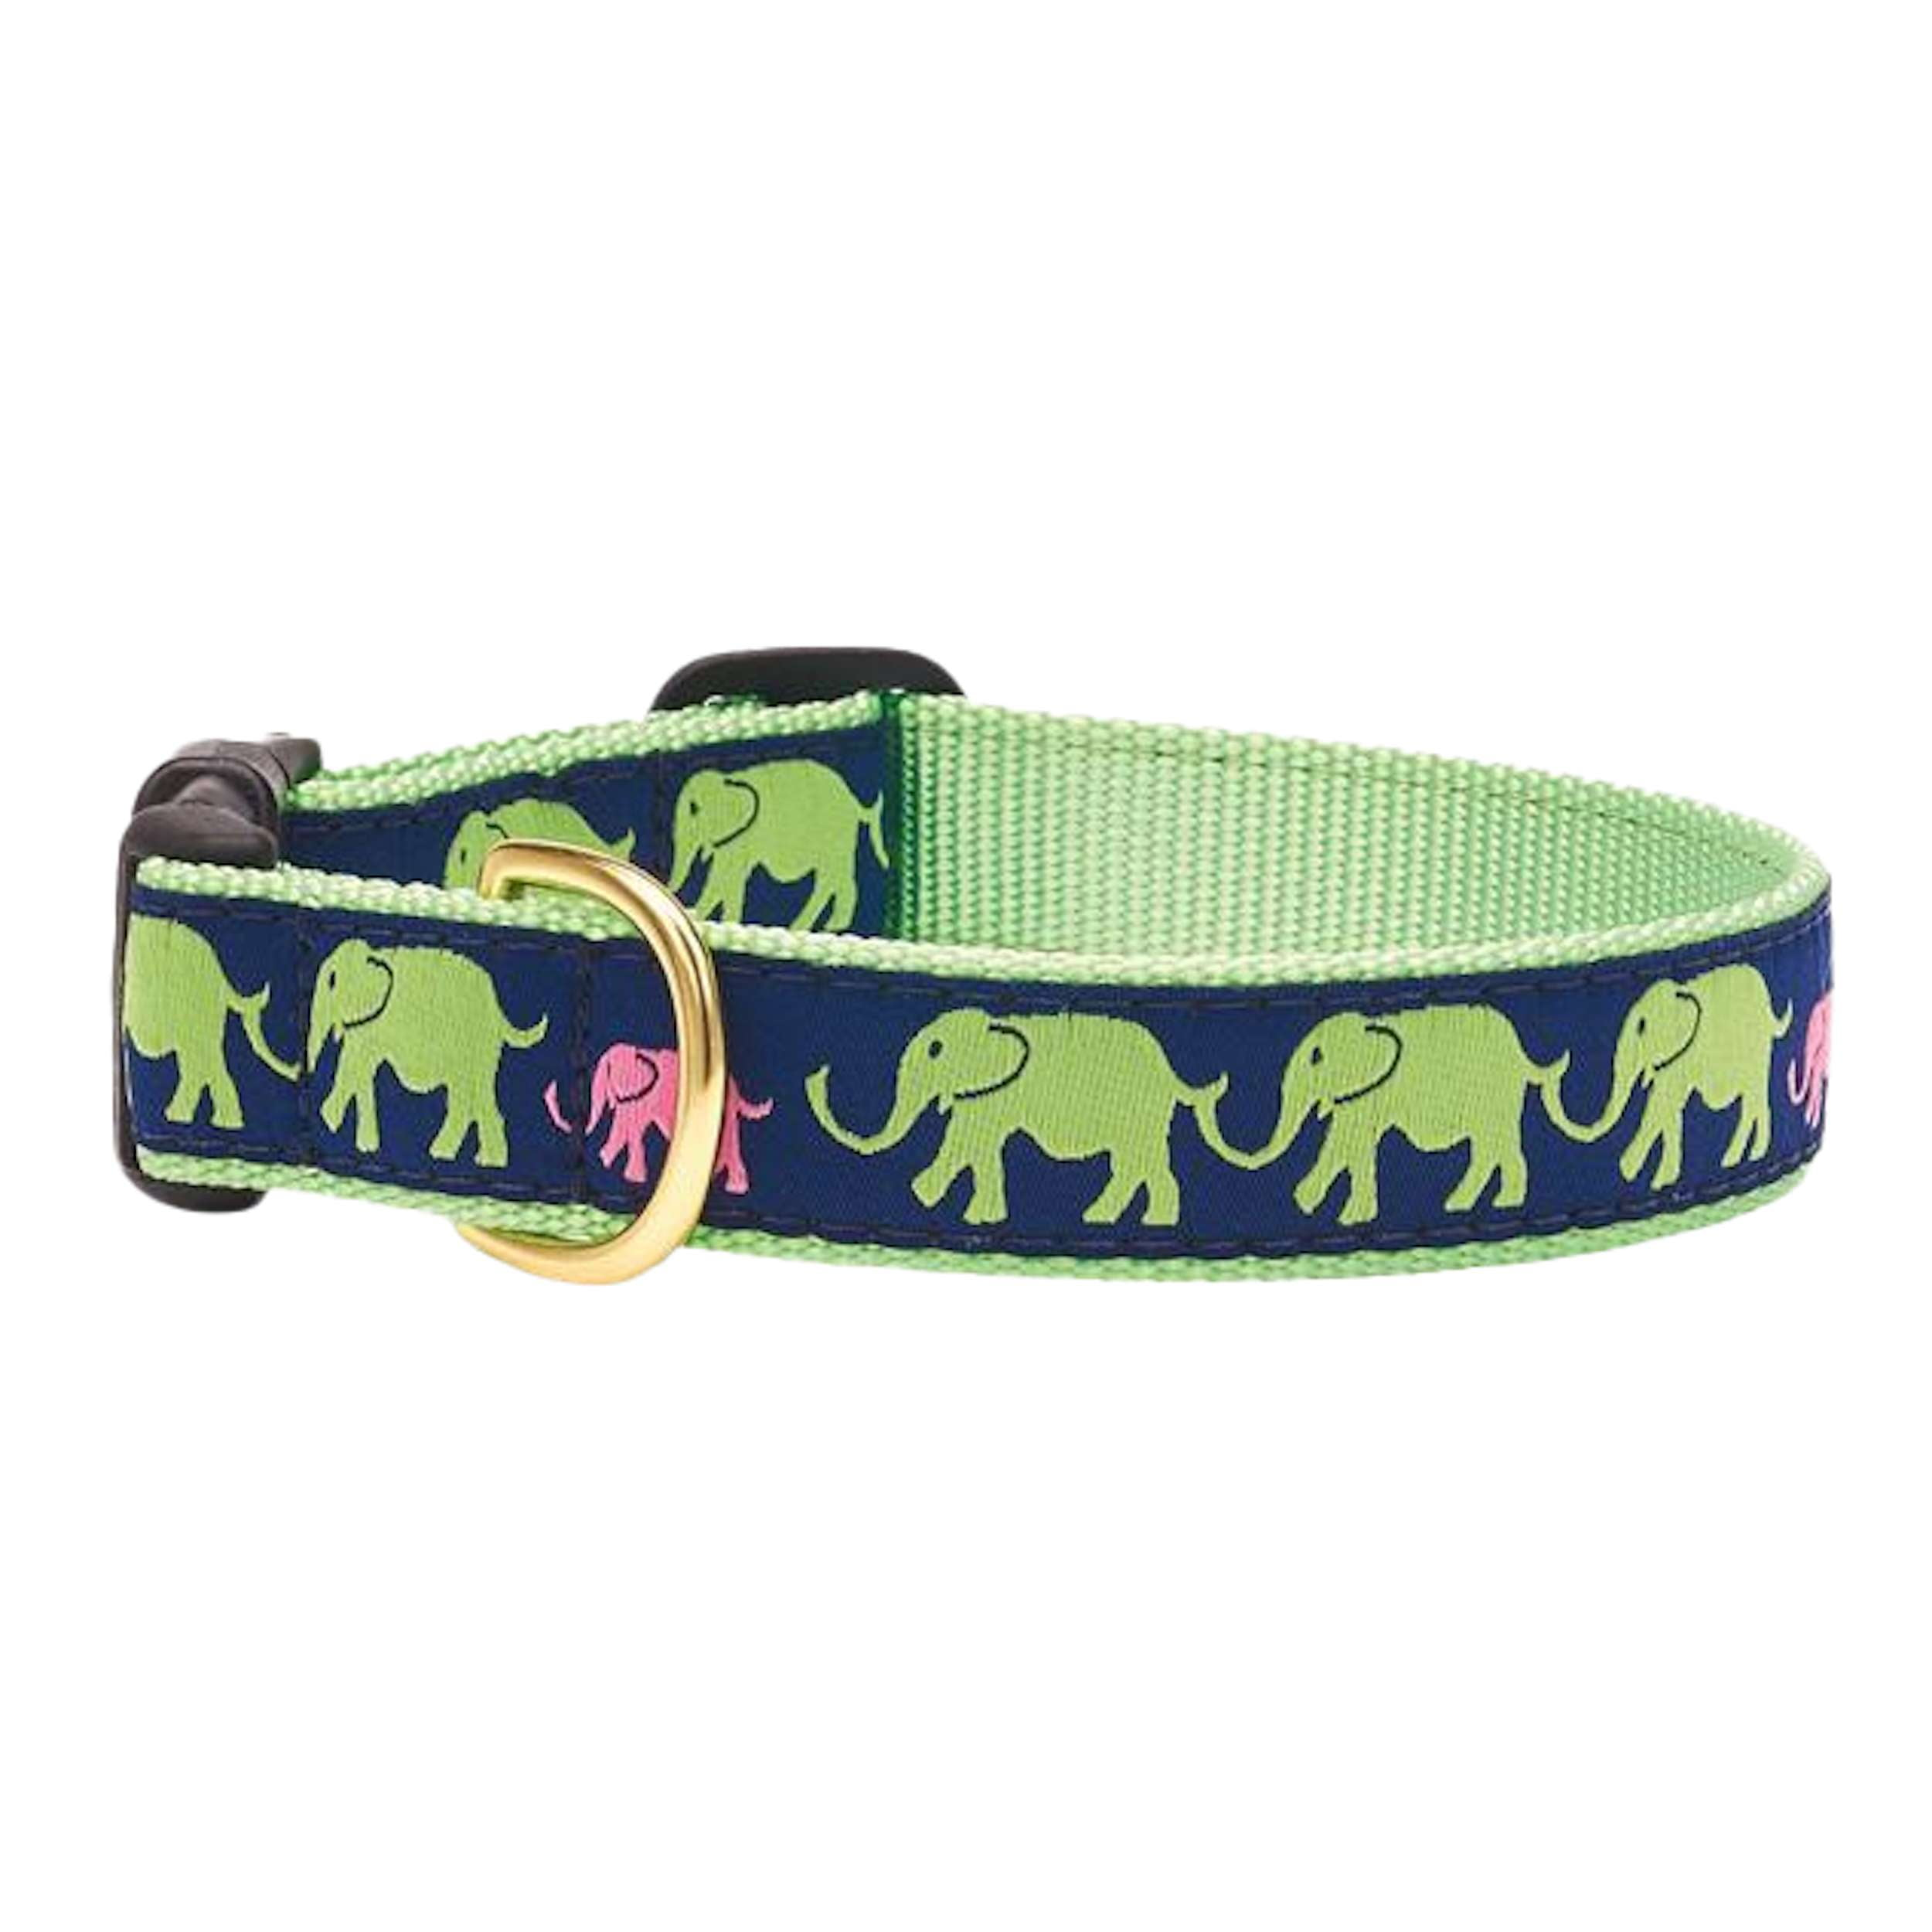 LEADER-OF-THE-PACH-ELEPHANT-DOG-COLLAR